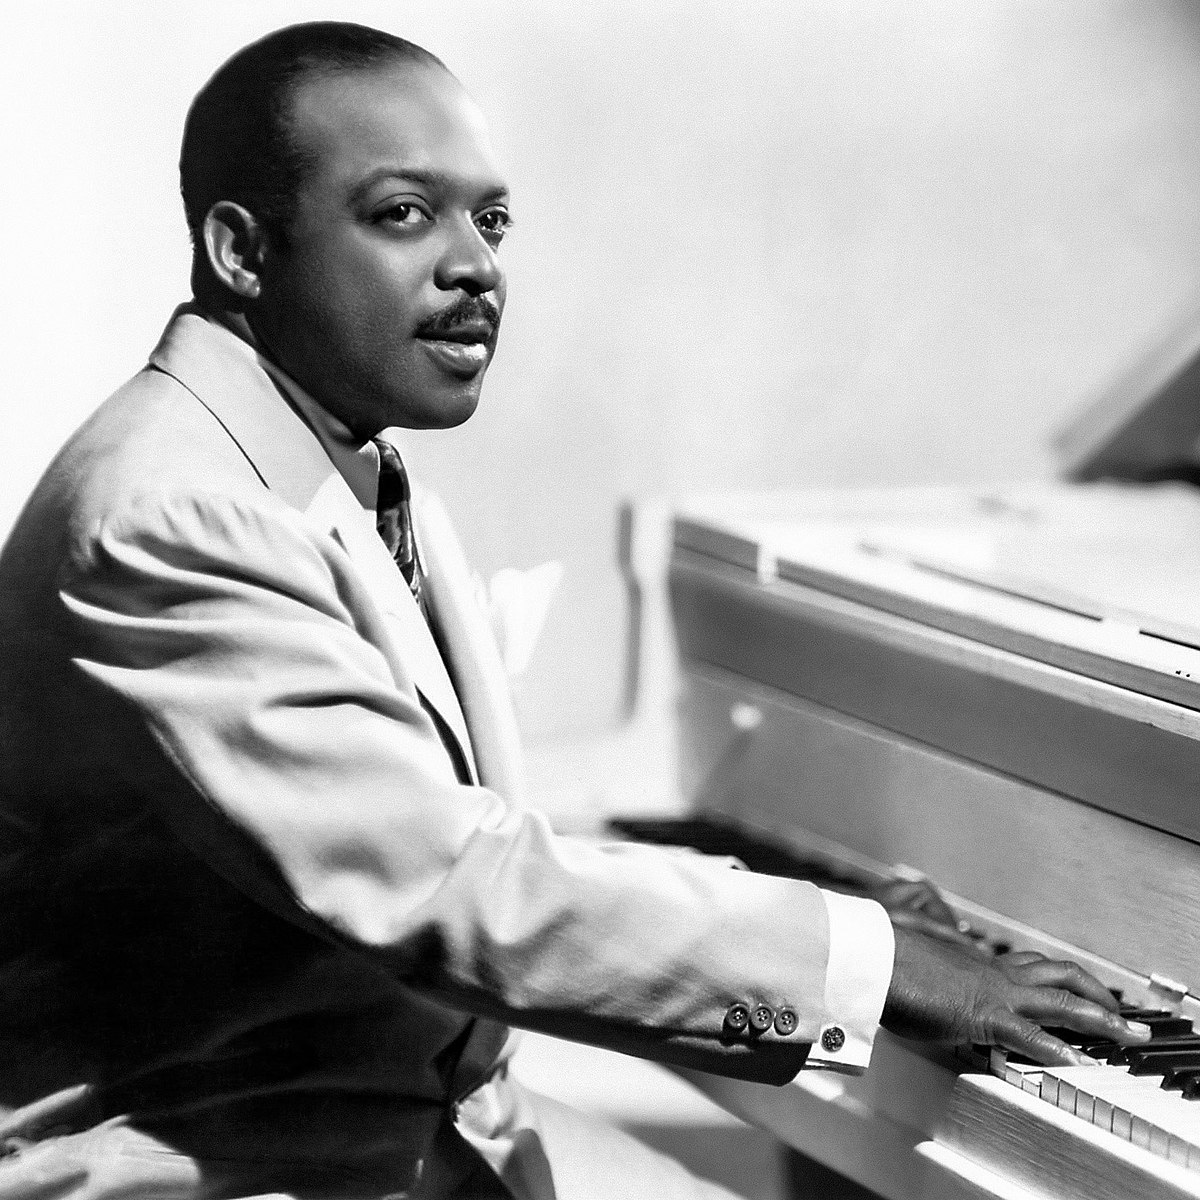 Count Basie & His Sextet - She's Funny That Way